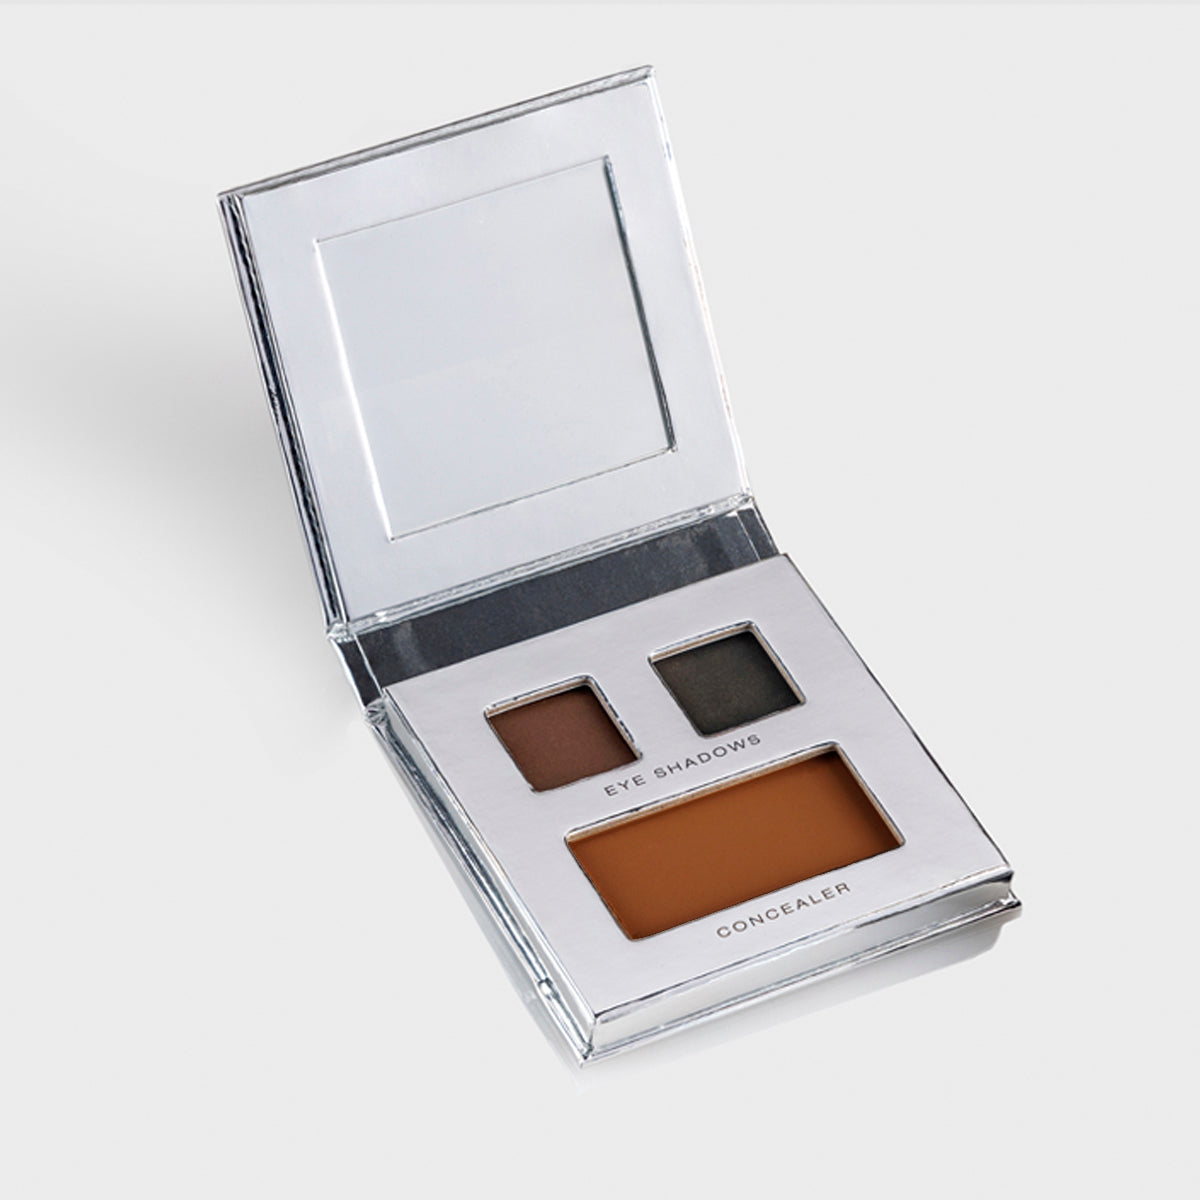 Fold Out Eyes Palette with Brown & Black Eyeshadow with concealer. Includes a mirror. In shade Hazelnut.